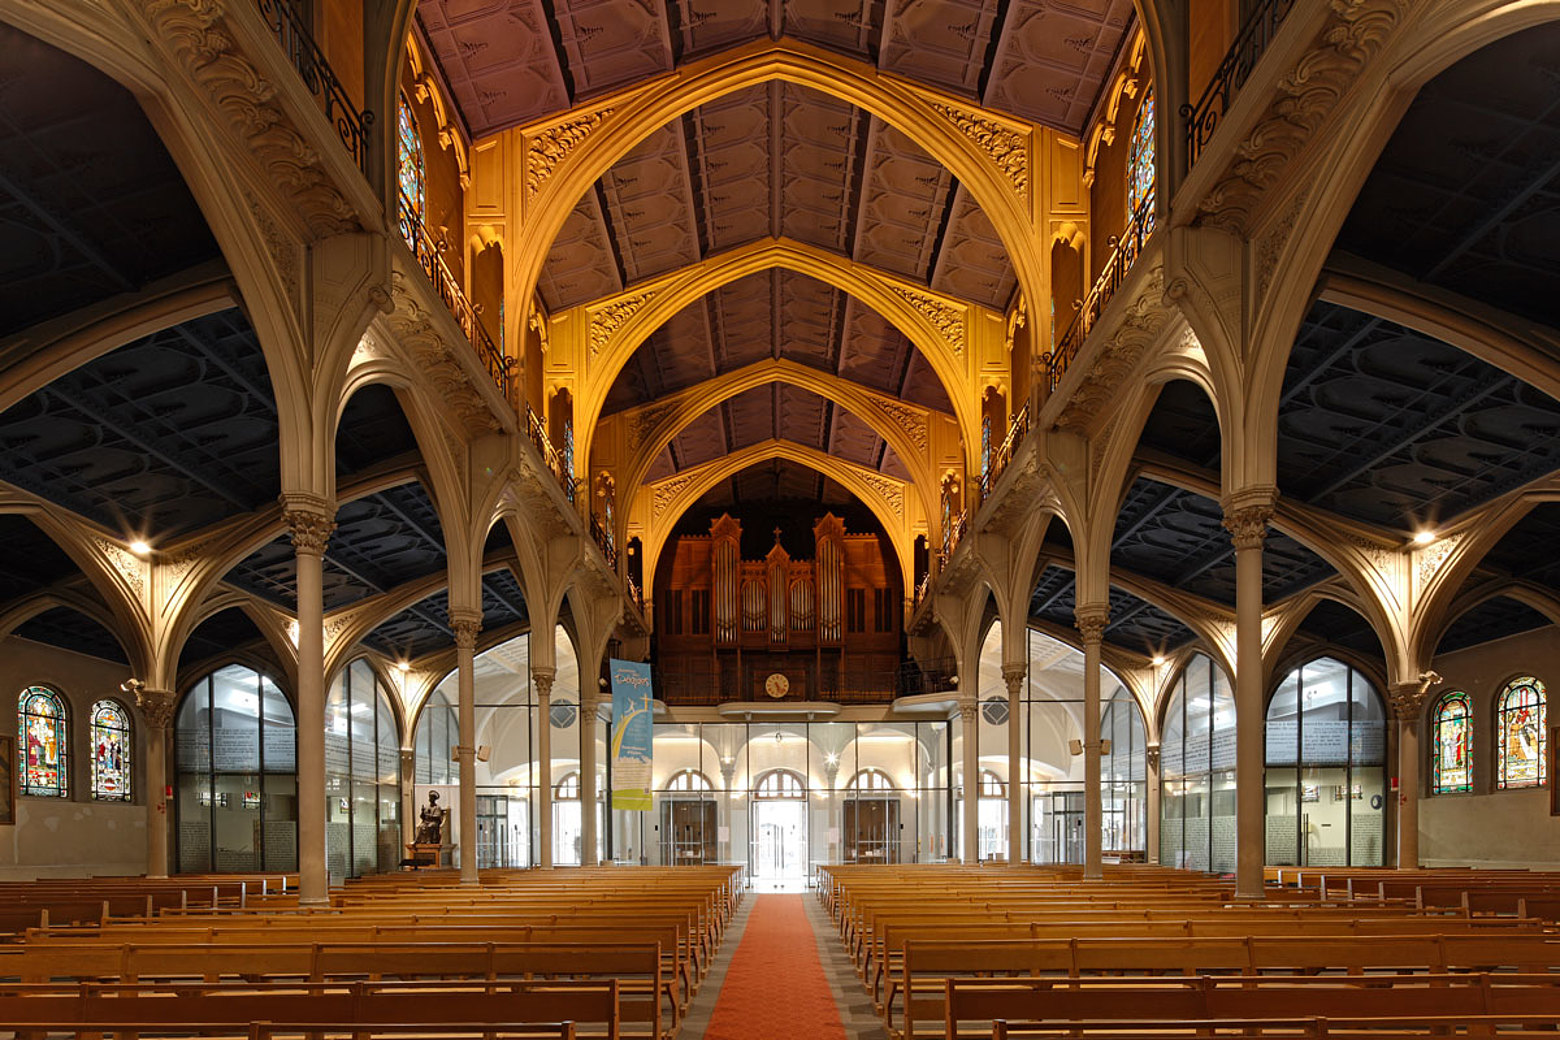 fire-resistant and smoke protection doors E30, forster presto and forster thermfix light
Church Saint Honoré d'Eylau, Paris